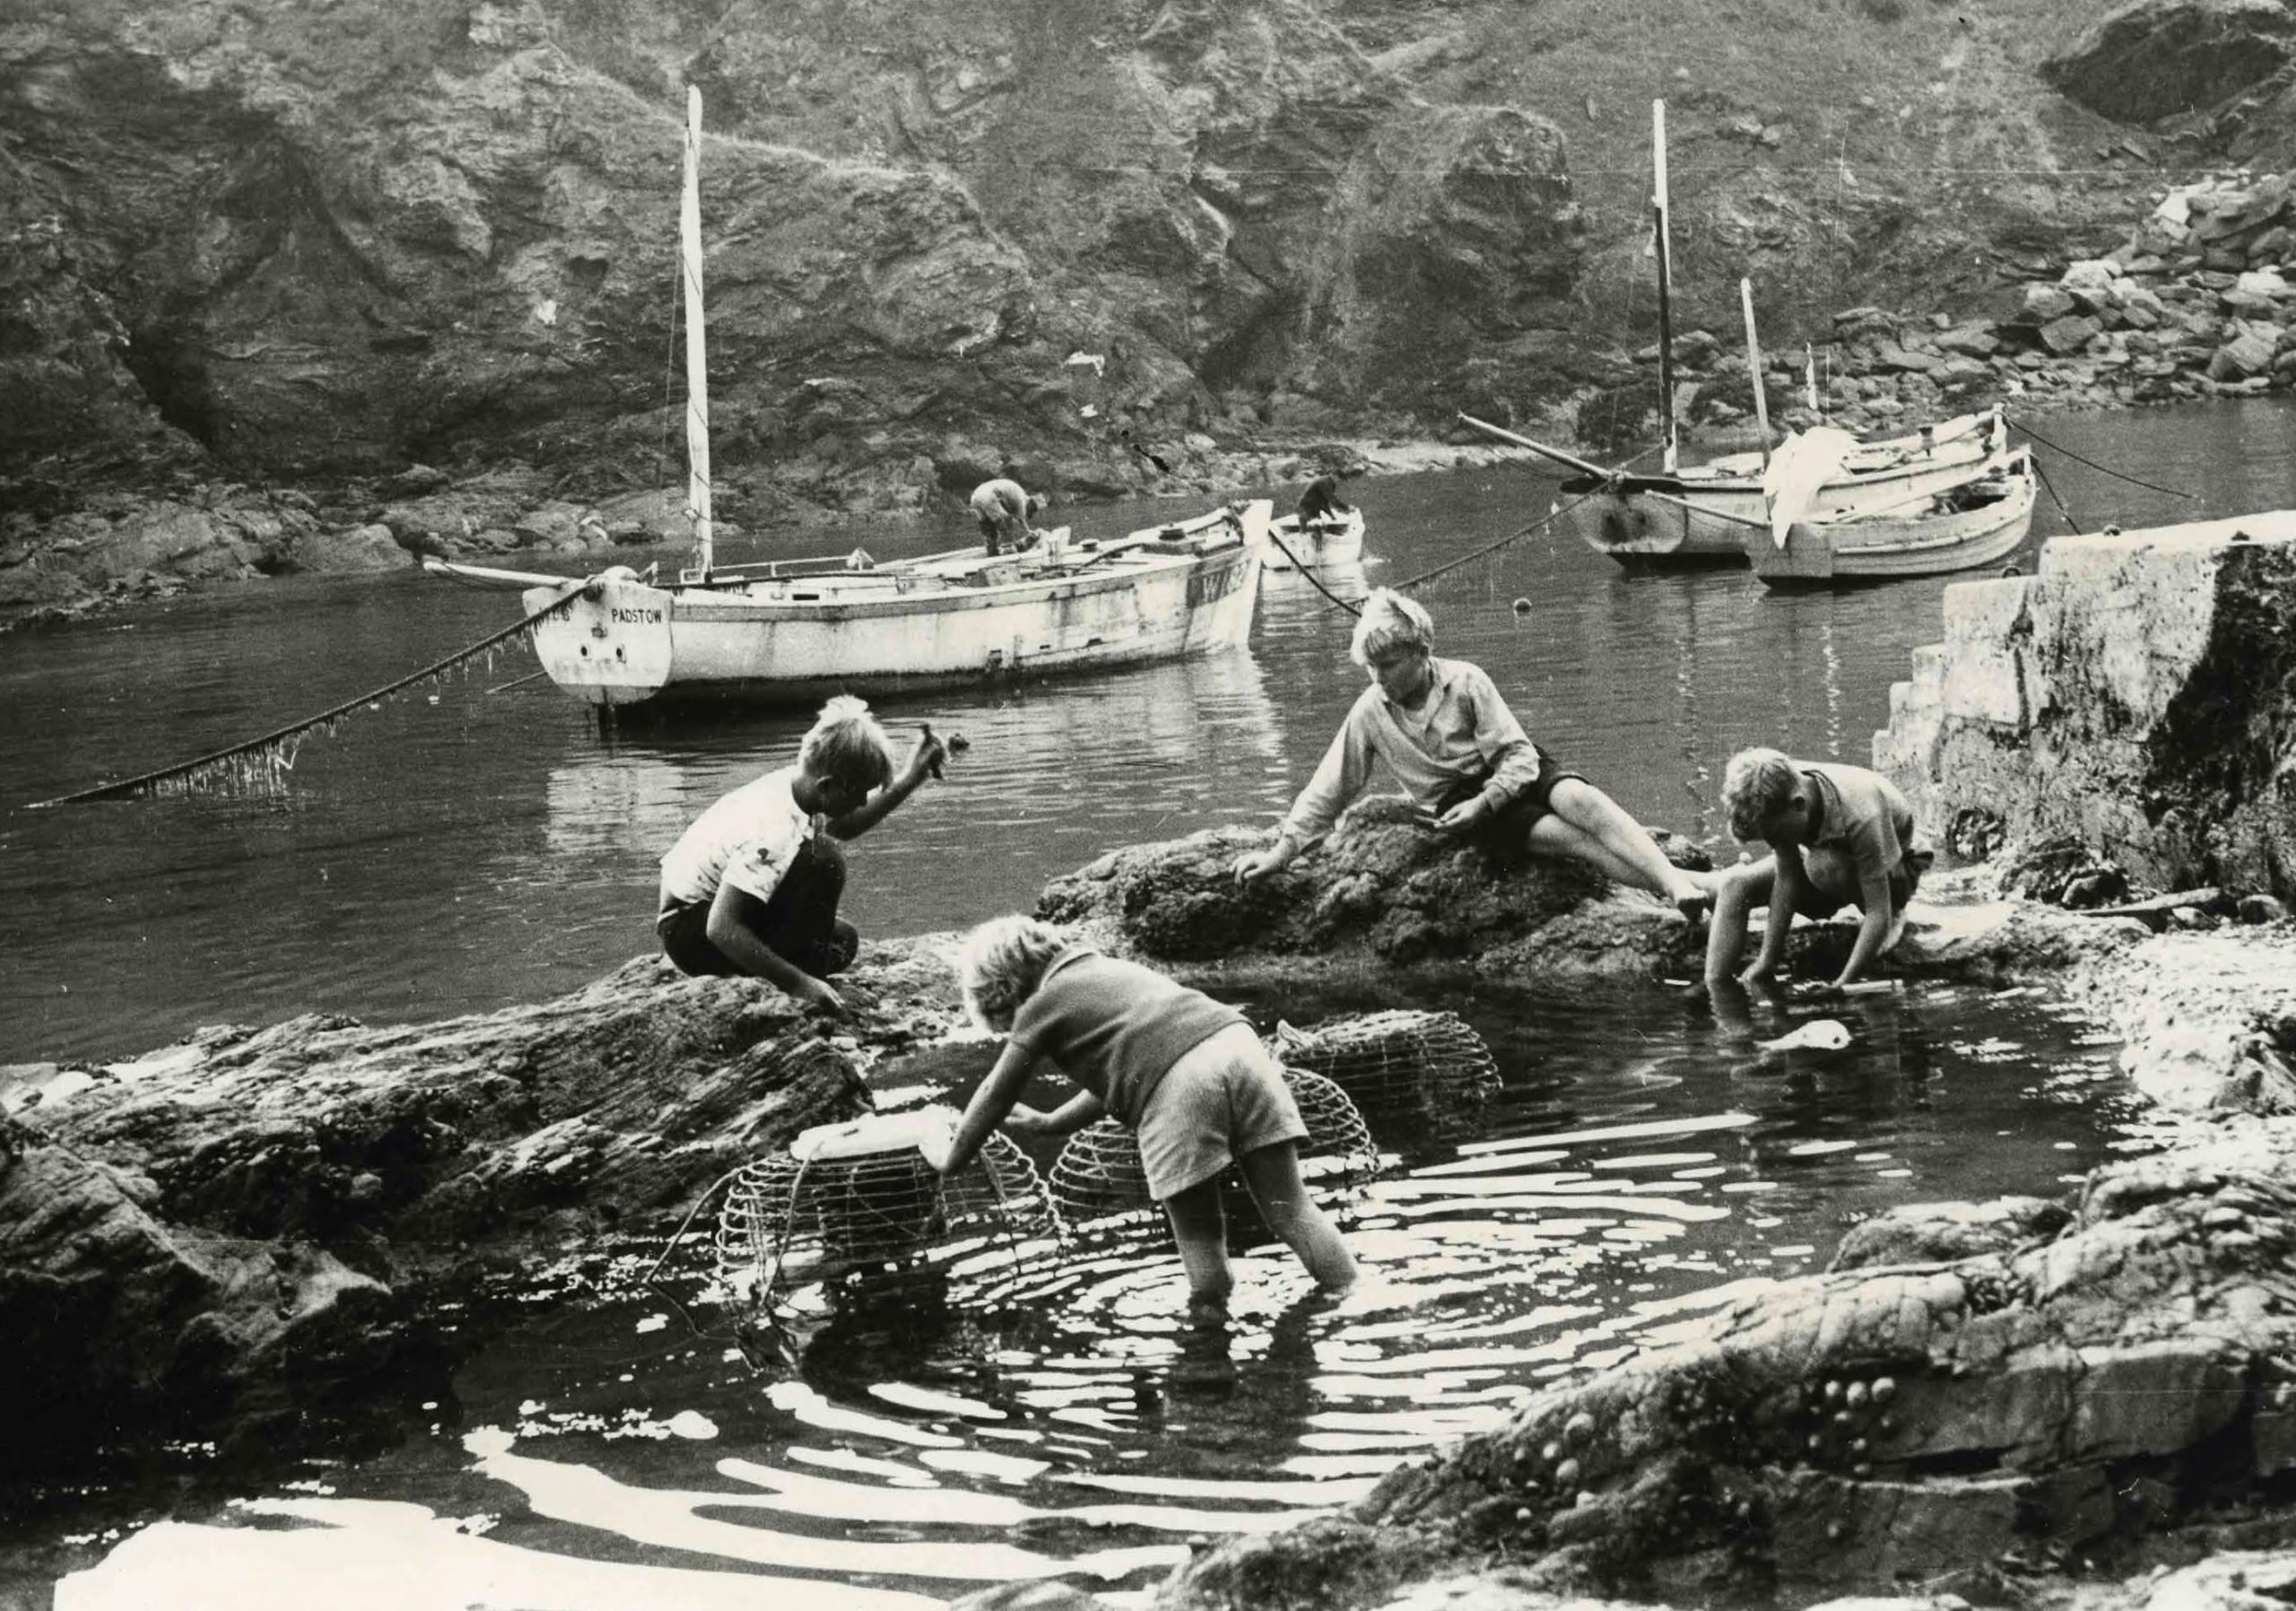 Playing on Port Isaac beach, 1966